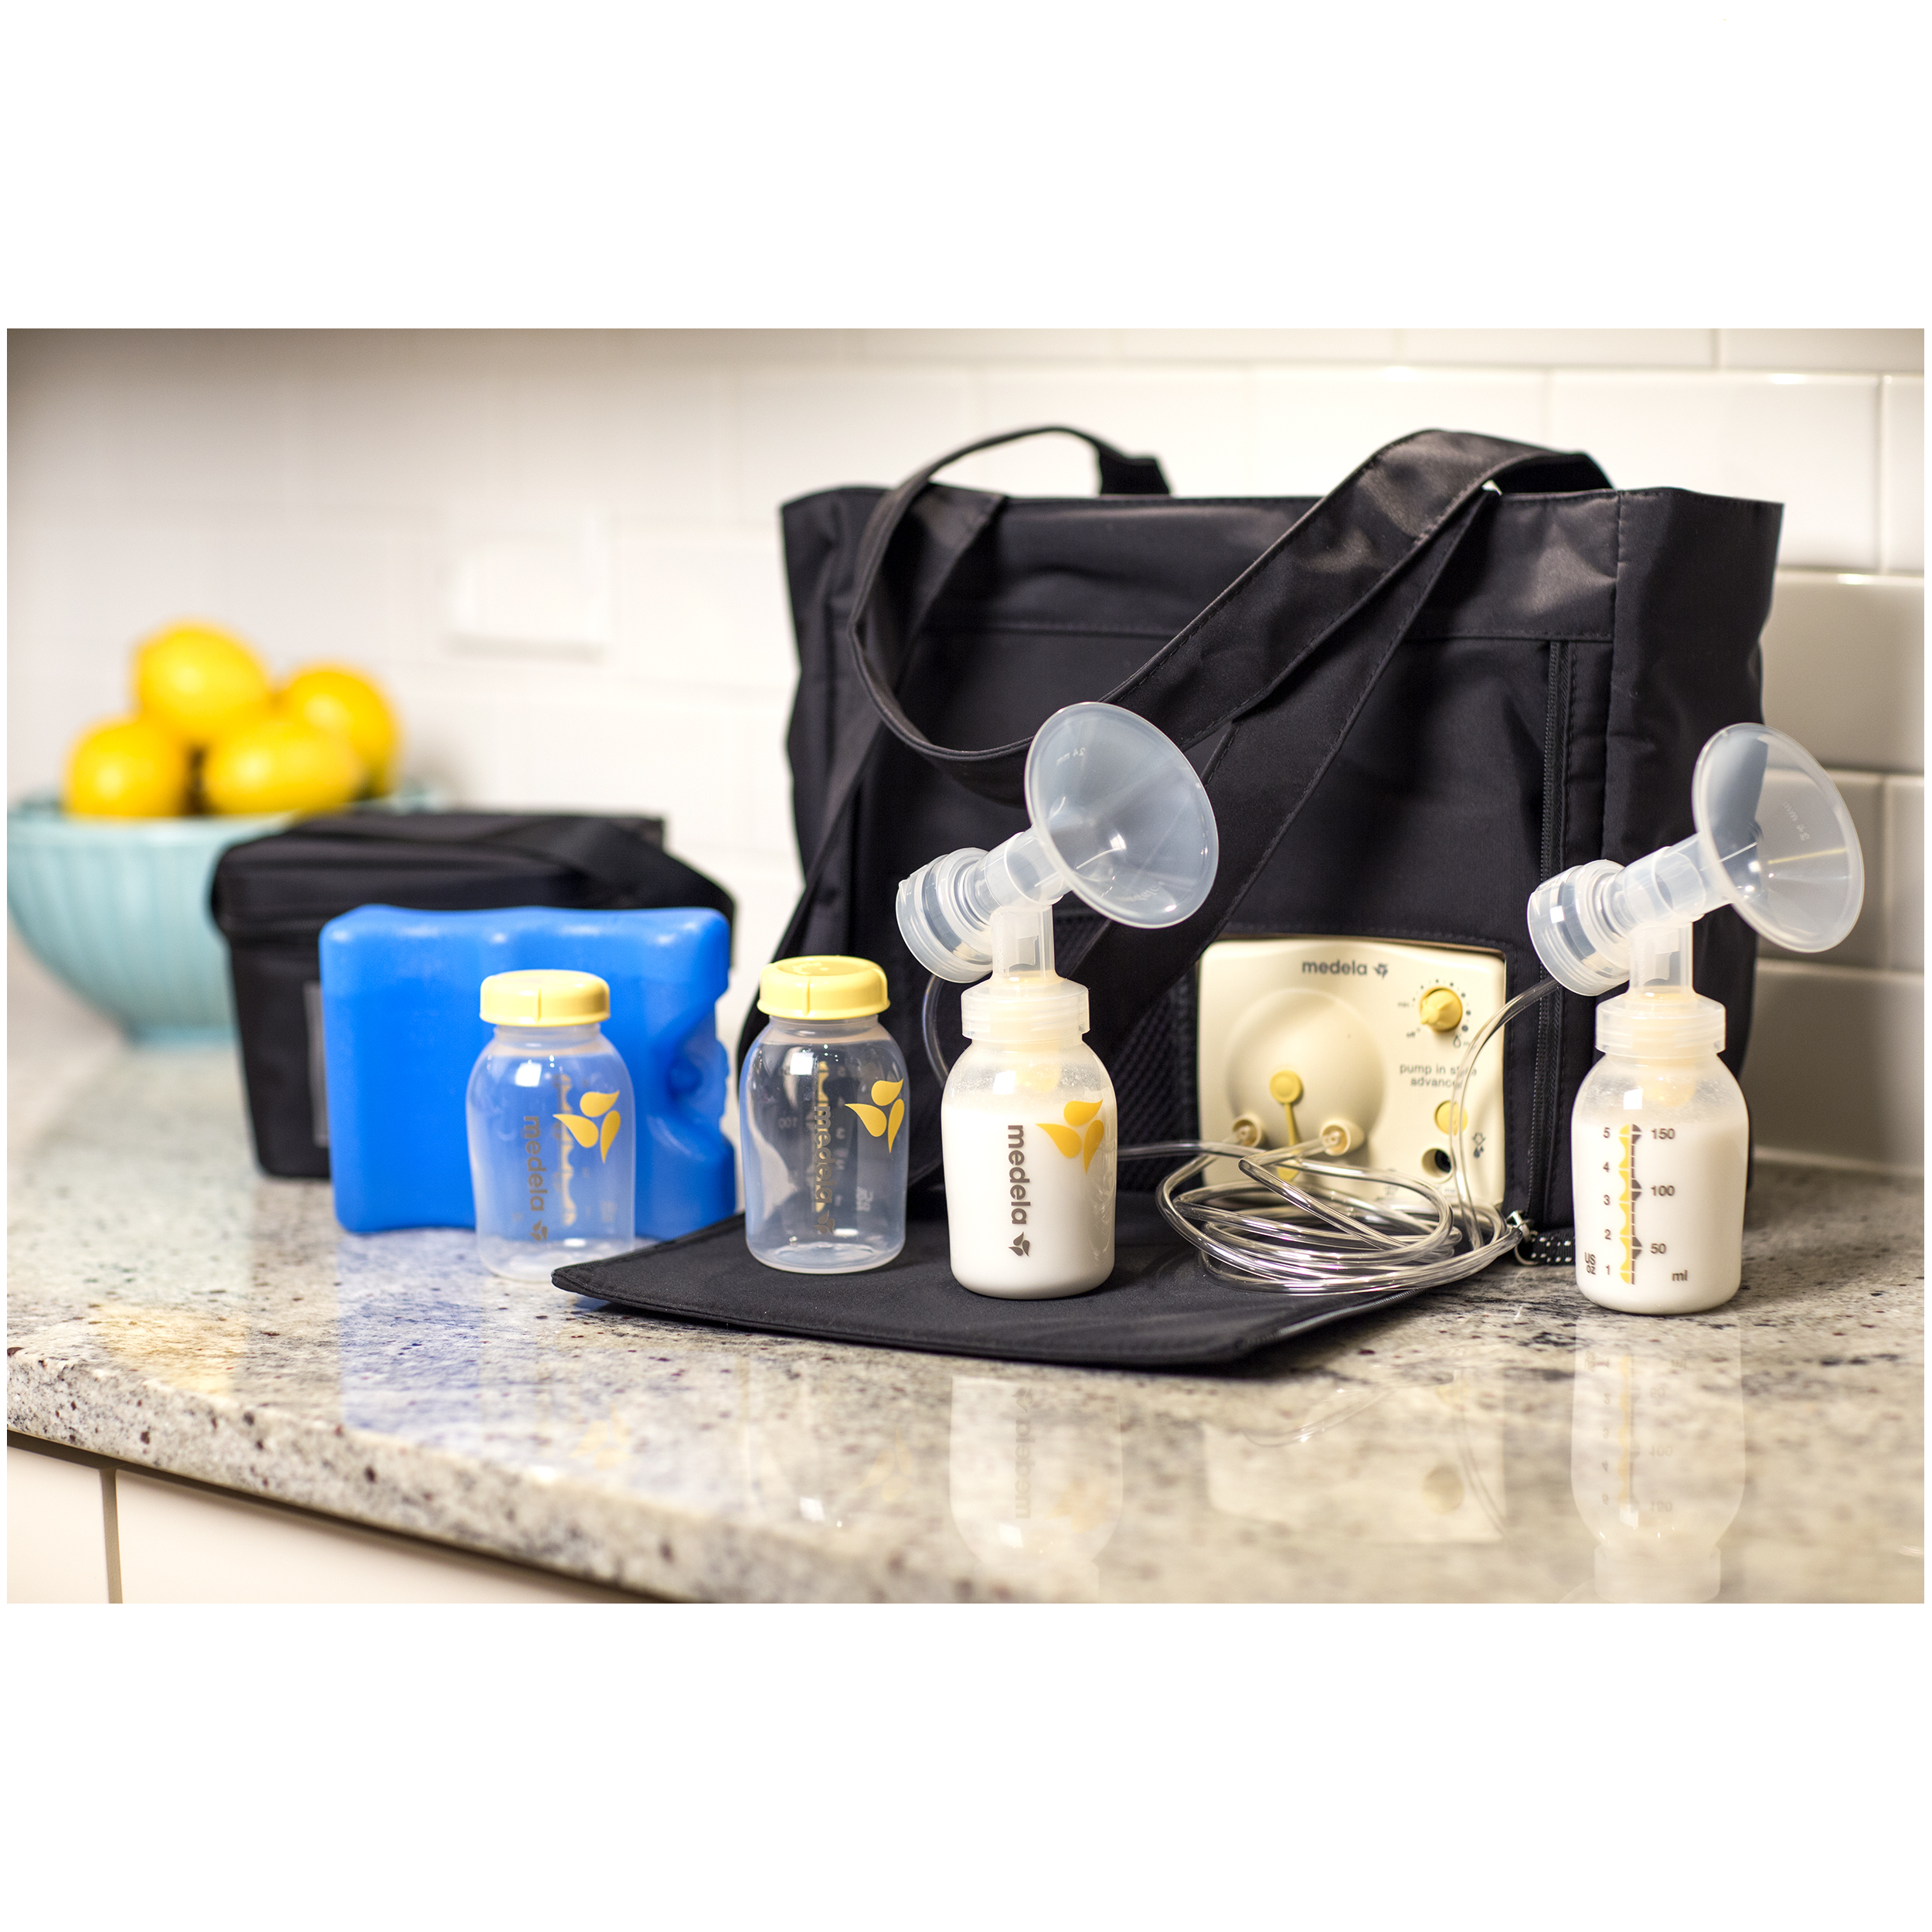 Medela Pump In Style Advanced Breast Pump with On-the-go Tote with International Adapter - image 5 of 9